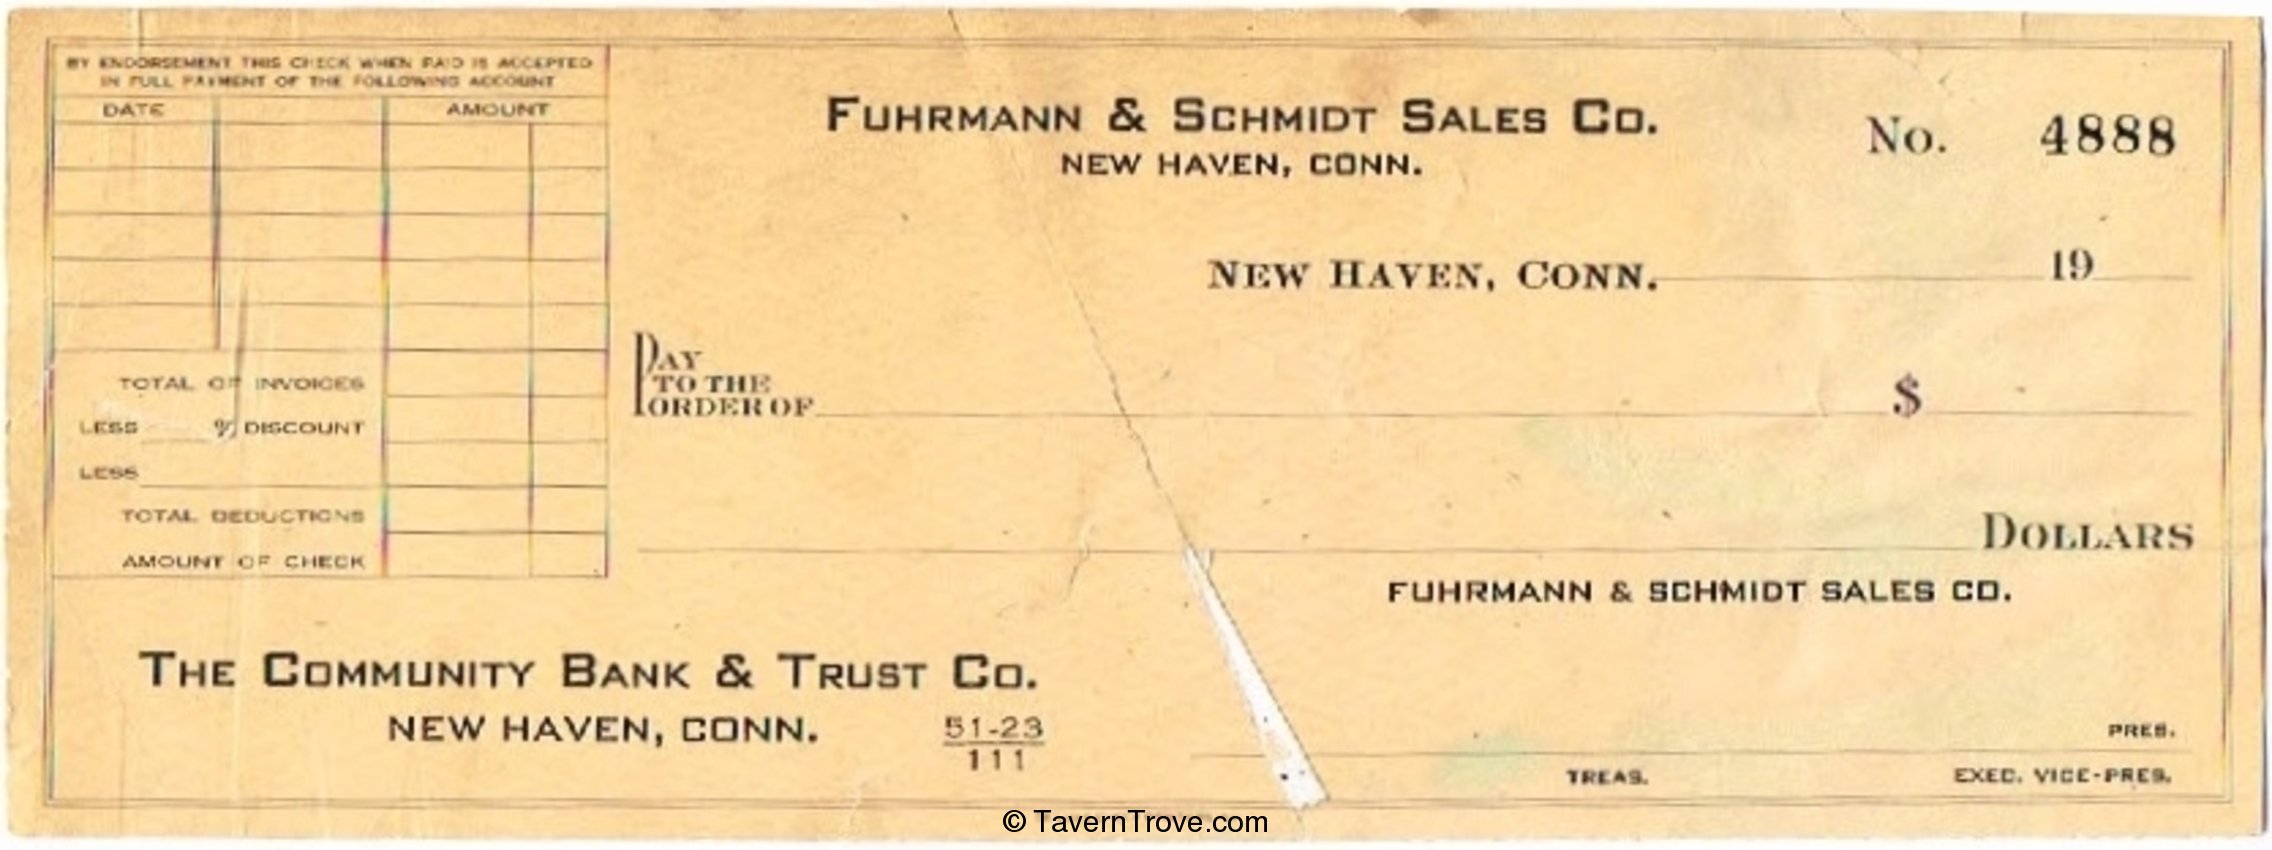 F&S Sales Co., New Haven CT